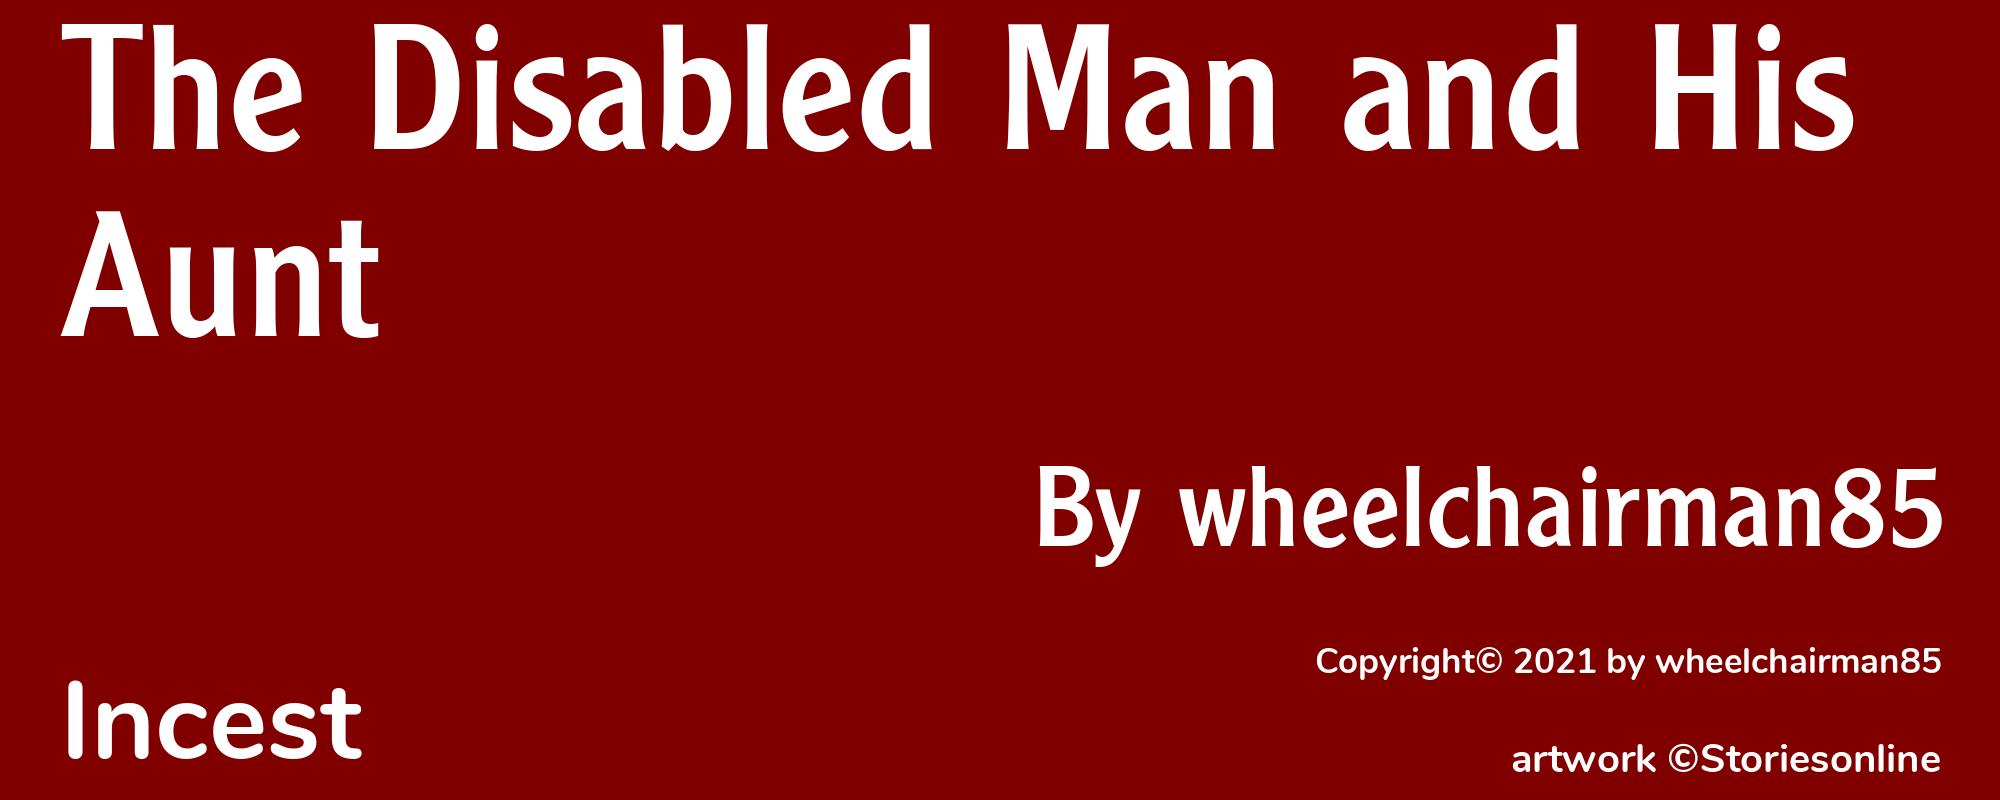 The Disabled Man and His Aunt - Cover